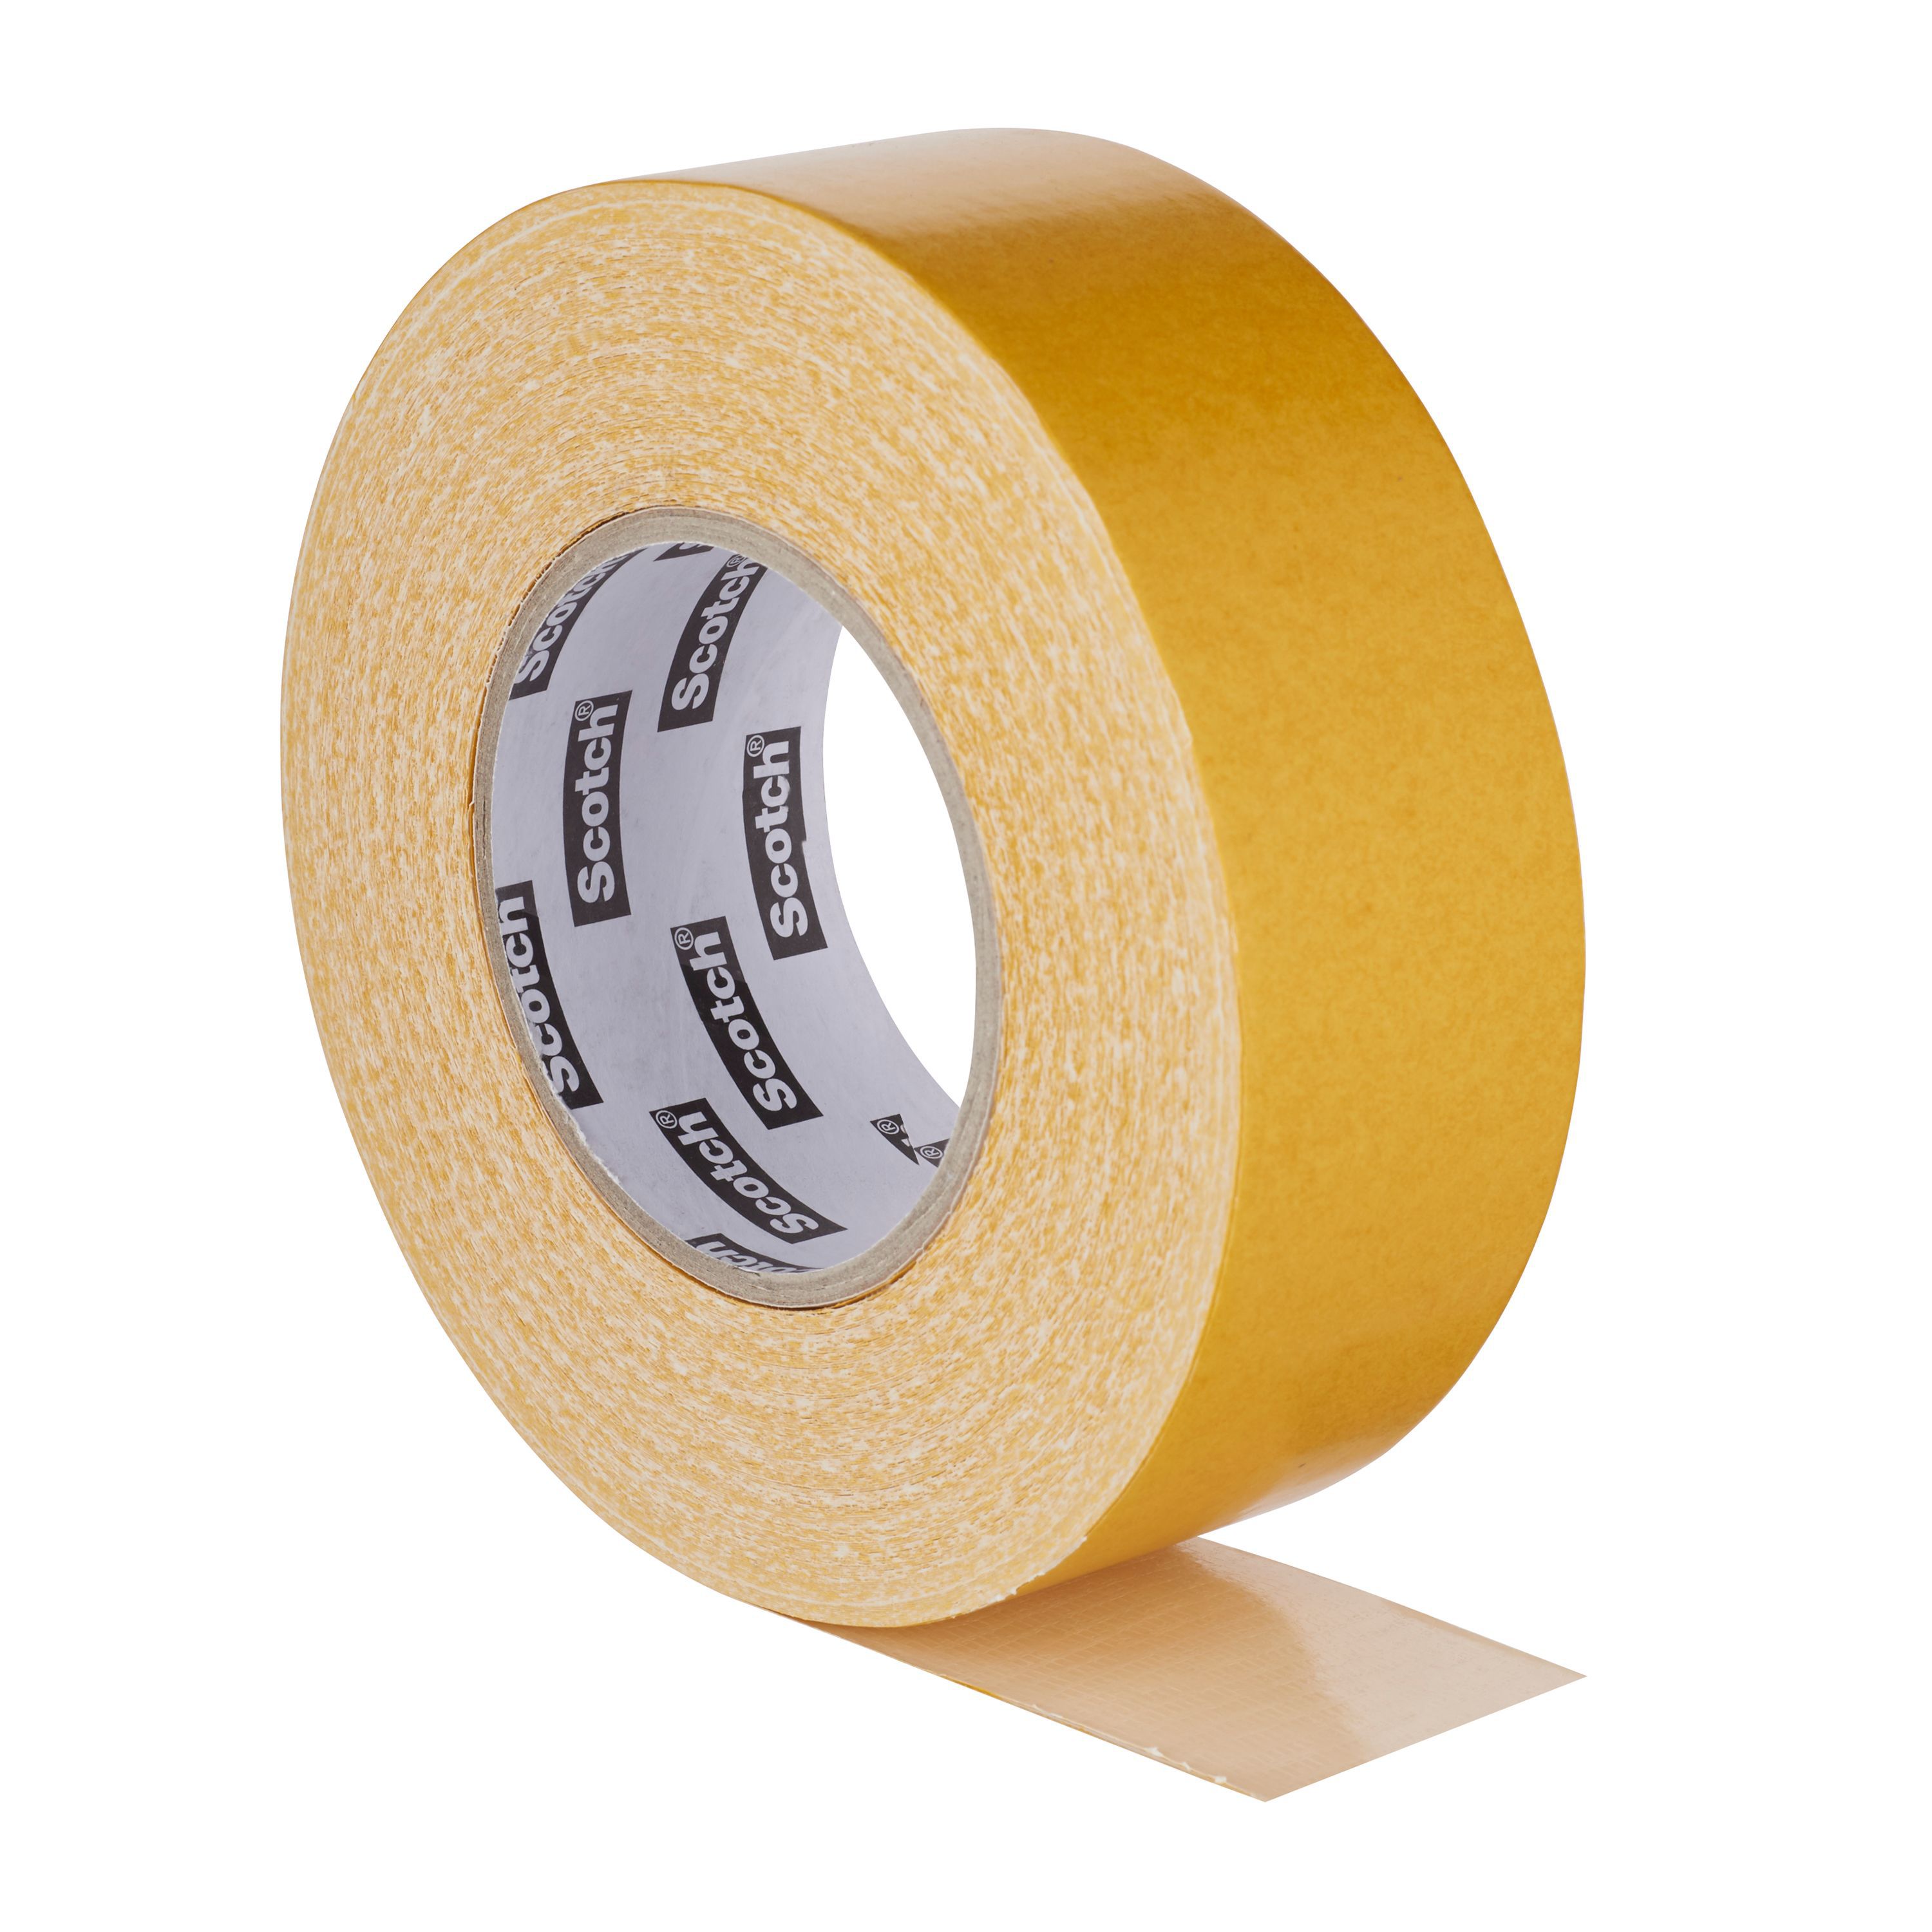 Scotch Yellow Double-sided Tape (L)25m (W)48mm